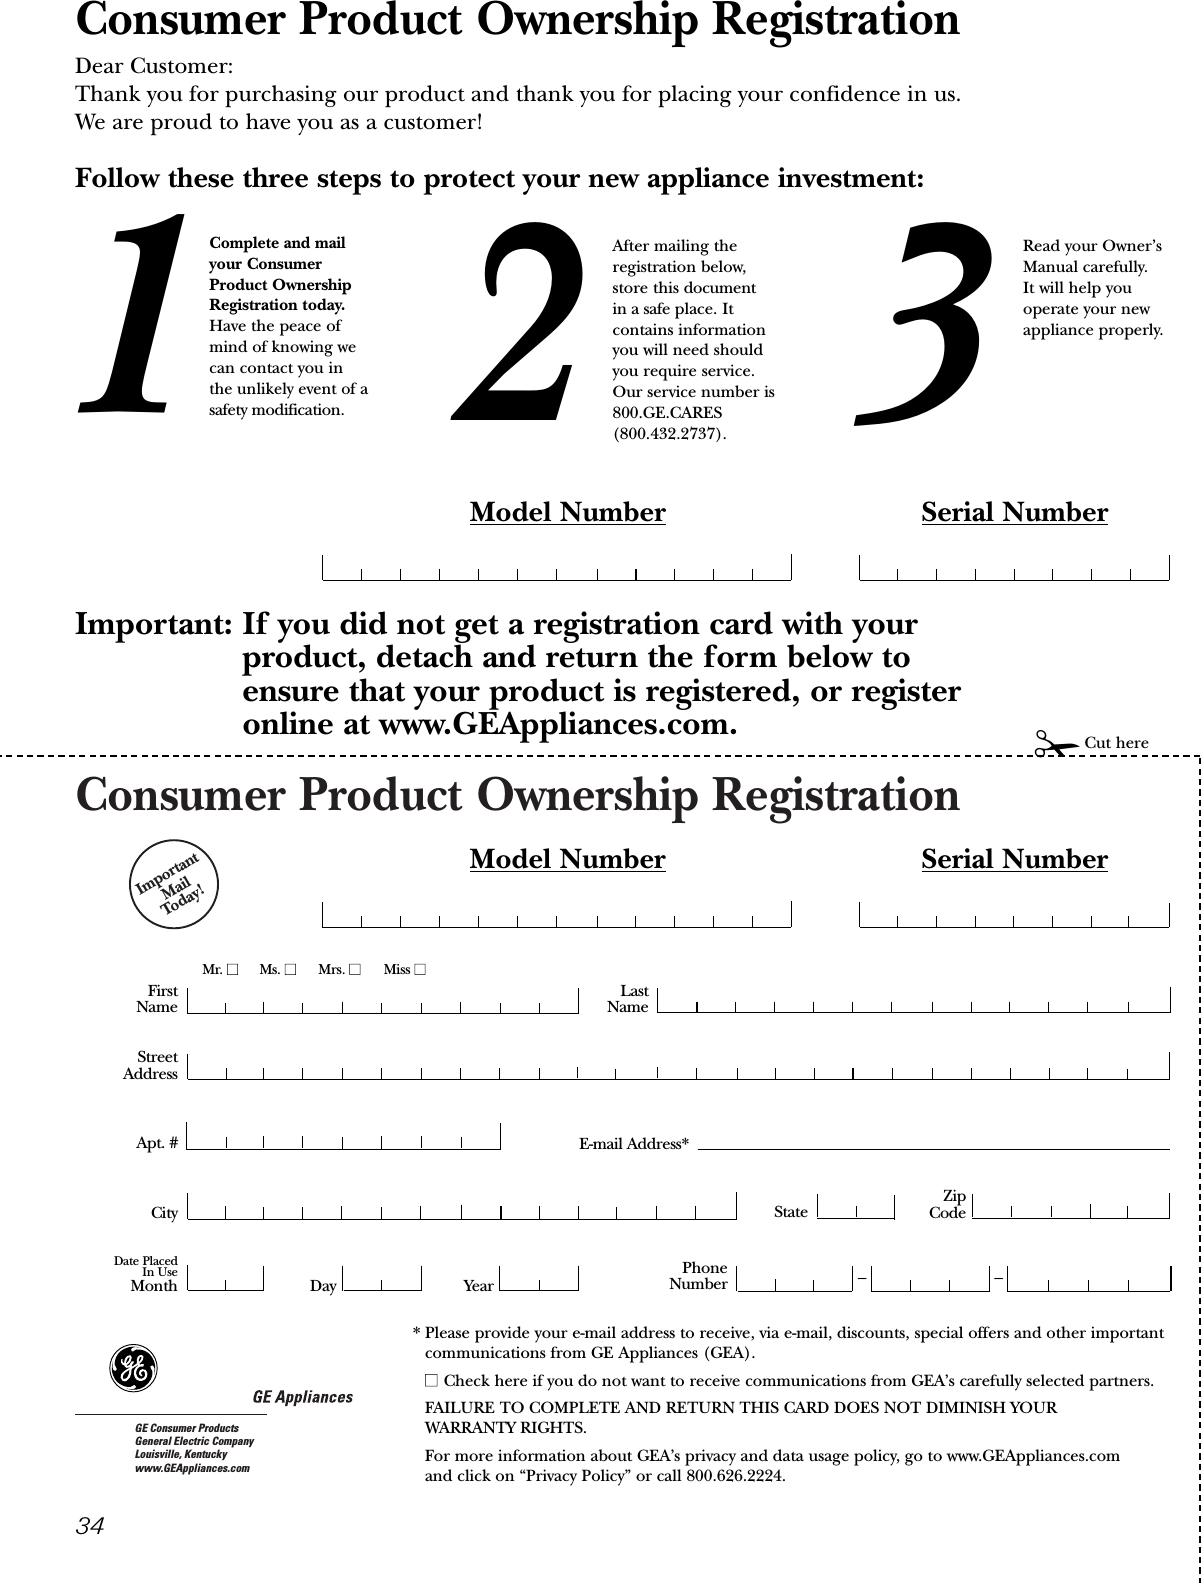 Consumer Product Ownership RegistrationImportantMail Today!GE Consumer ProductsGeneral Electric CompanyLouisville, Kentuckywww.GEAppliances.comFirstNameMr. ■■Ms. ■■Mrs. ■■Miss ■■StreetAddressCity StateDate PlacedIn UseMonth Day YearZipCodeApt. #LastNamePhoneNumber __Consumer Product Ownership RegistrationDear Customer:Thank you for purchasing our product and thank you for placing your confidence in us. We are proud to have you as a customer!Follow these three steps to protect your new appliance investment:Important: If you did not get a registration card with your product, detach and return the form below to ensure that your product is registered, or registeronline at www.GEAppliances.com.123Model Number Serial Number✁Cut hereComplete and mailyour ConsumerProduct OwnershipRegistration today.Have the peace ofmind of knowing wecan contact you inthe unlikely event of asafety modification.After mailing theregistration below, store this document in a safe place. Itcontains informationyou will need should you require service. Our service number is800.GE.CARES (800.432.2737).Read your Owner’sManual carefully.It will help youoperate your newappliance properly.Model Number Serial NumberE-mail Address** Please provide your e-mail address to receive, via e-mail, discounts, special offers and other importantcommunications from GE Appliances (GEA).■■ Check here if you do not want to receive communications from GEA’s carefully selected partners.FAILURE TO COMPLETE AND RETURN THIS CARD DOES NOT DIMINISH YOUR WARRANTY RIGHTS.For more information about GEA’s privacy and data usage policy, go to www.GEAppliances.com and click on “Privacy Policy” or call 800.626.2224.34